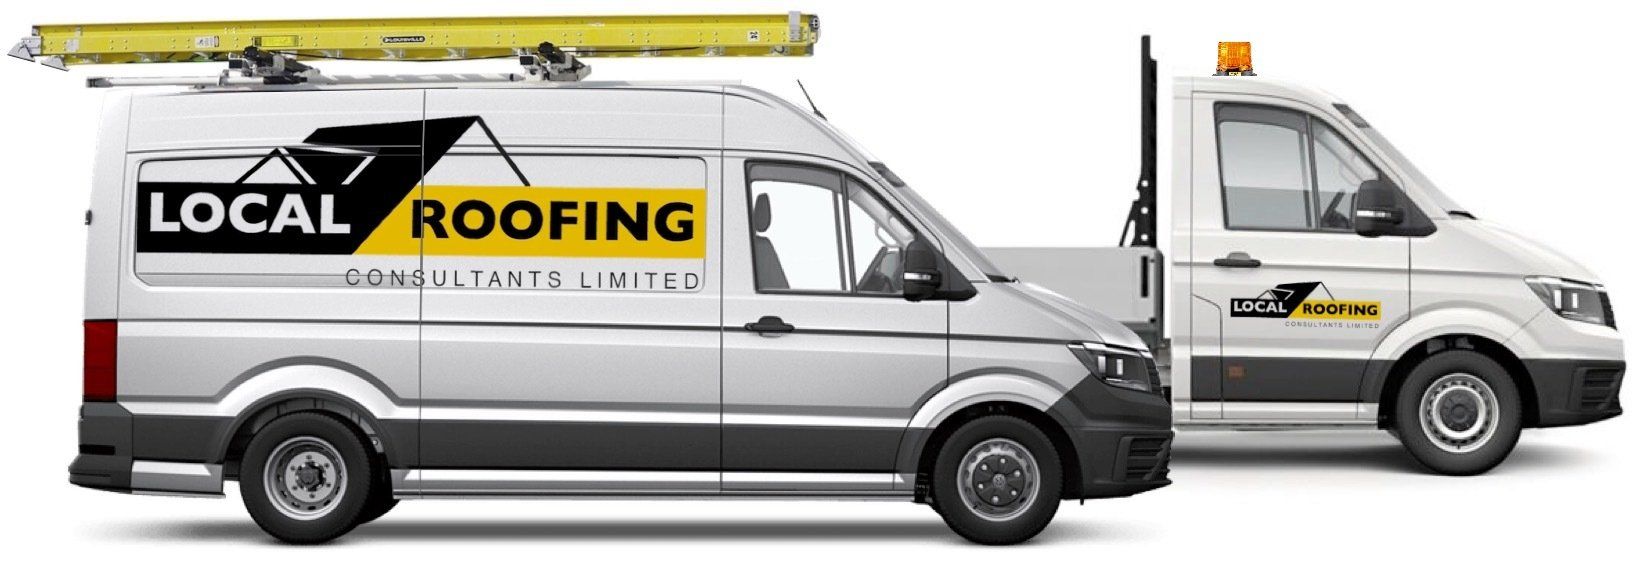 Local Roofing Consultants Limited work in Pimlico and throughout the London area